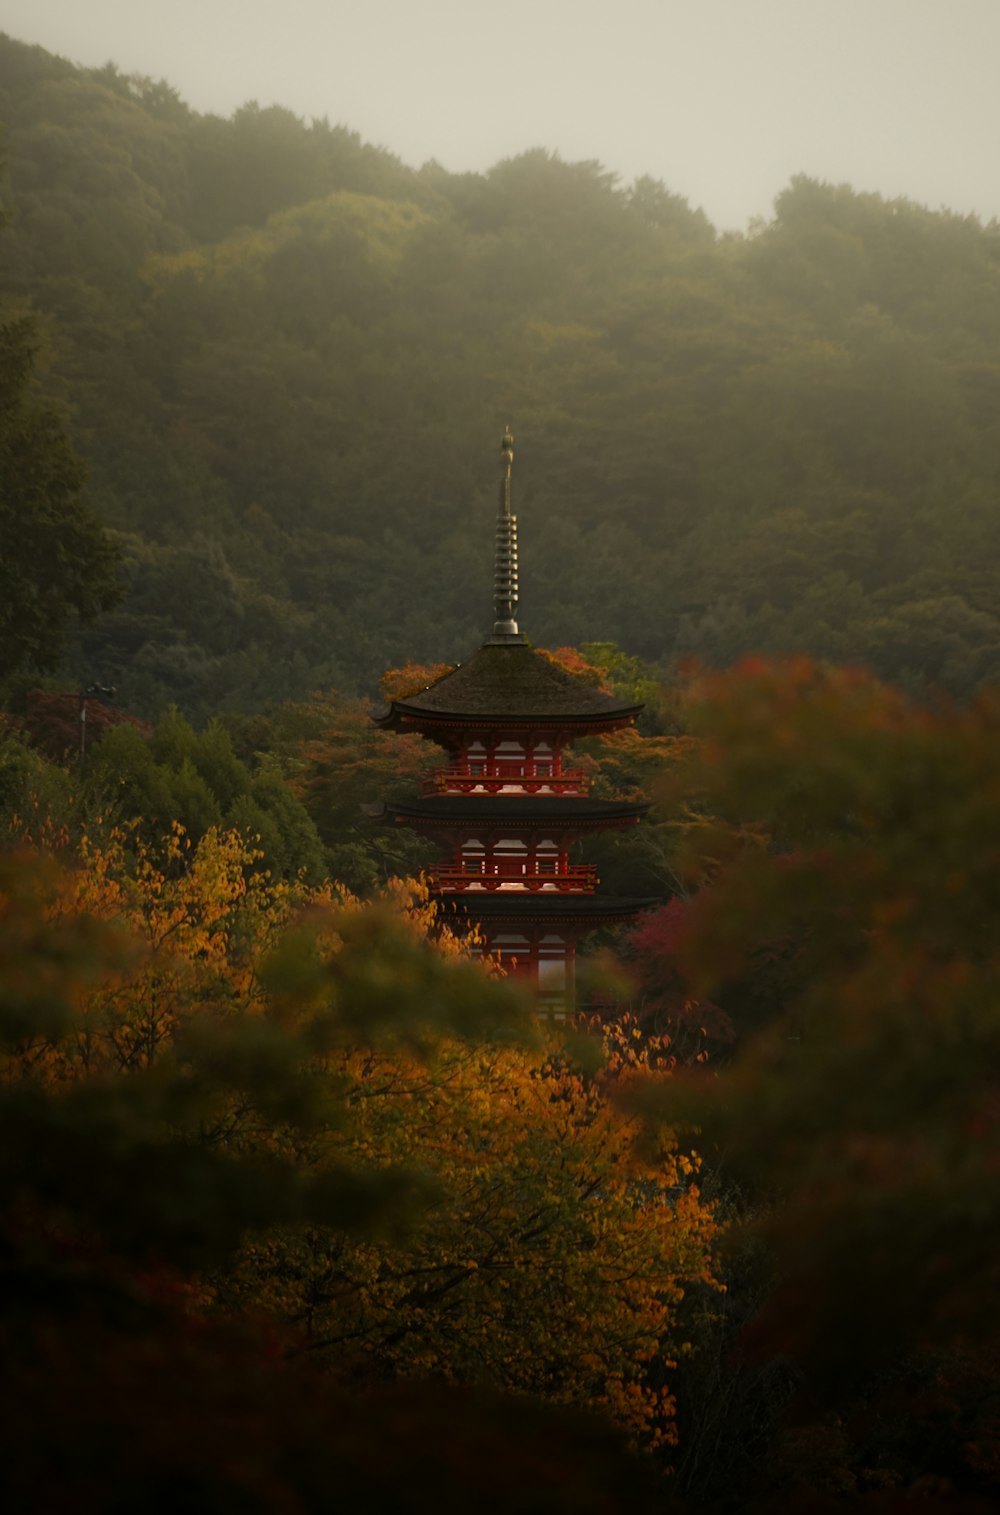 a pagoda in the middle of a forest